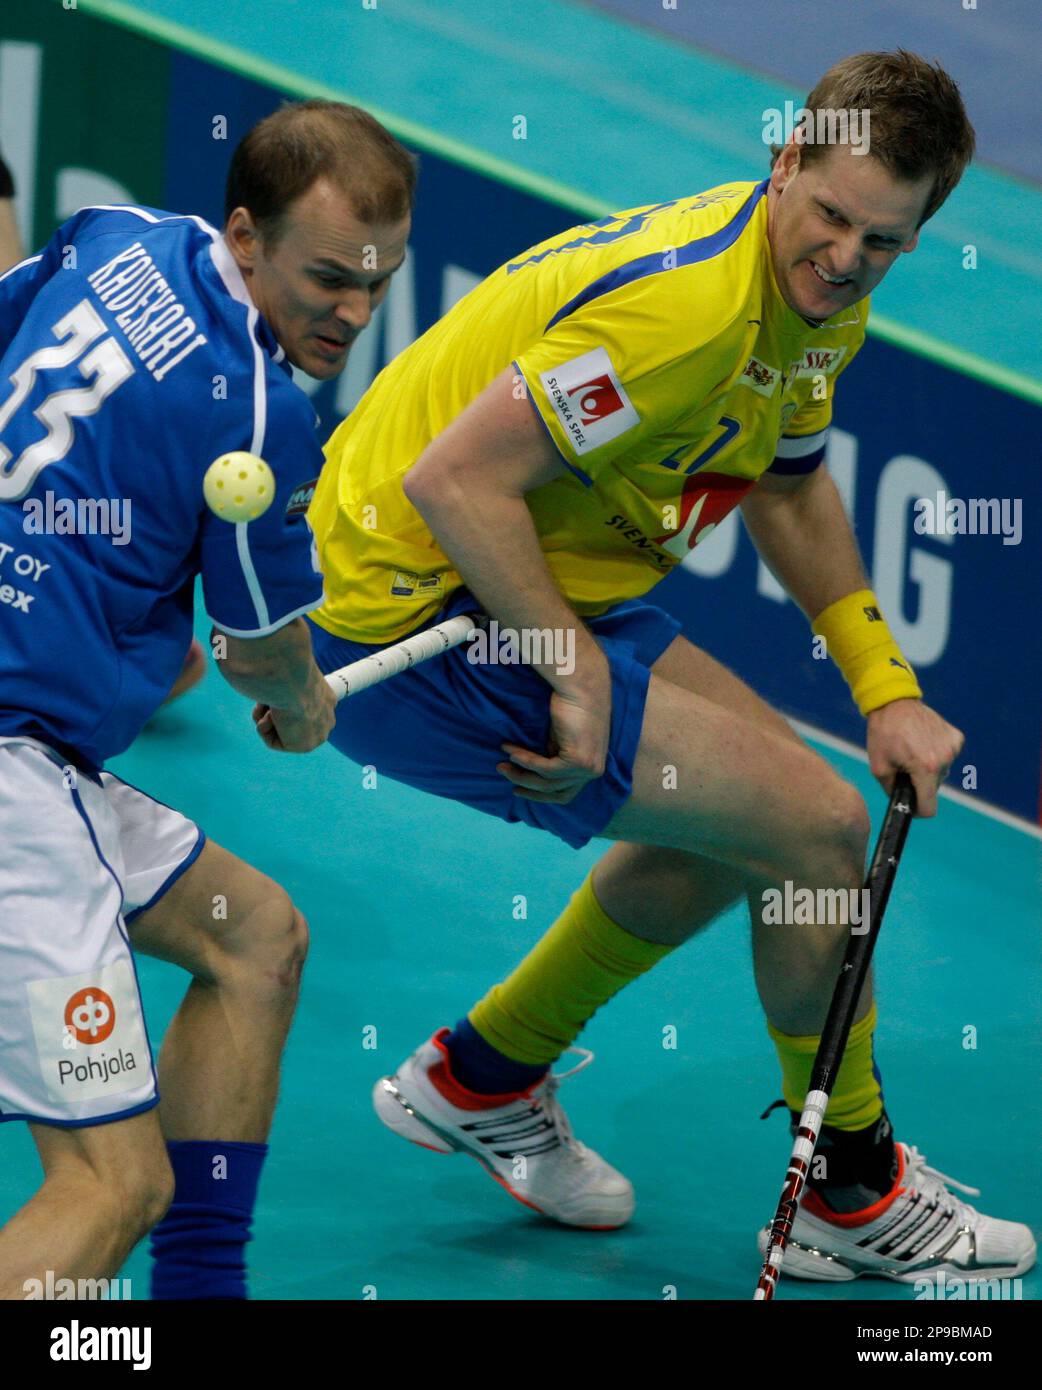 Mika Kavekari, left, from Finland fights for a ball with Niklas, Linde, right, from Sweden during their Floorball World Championship gold medal match in Prague, Czech Republic, Sunday, Dec